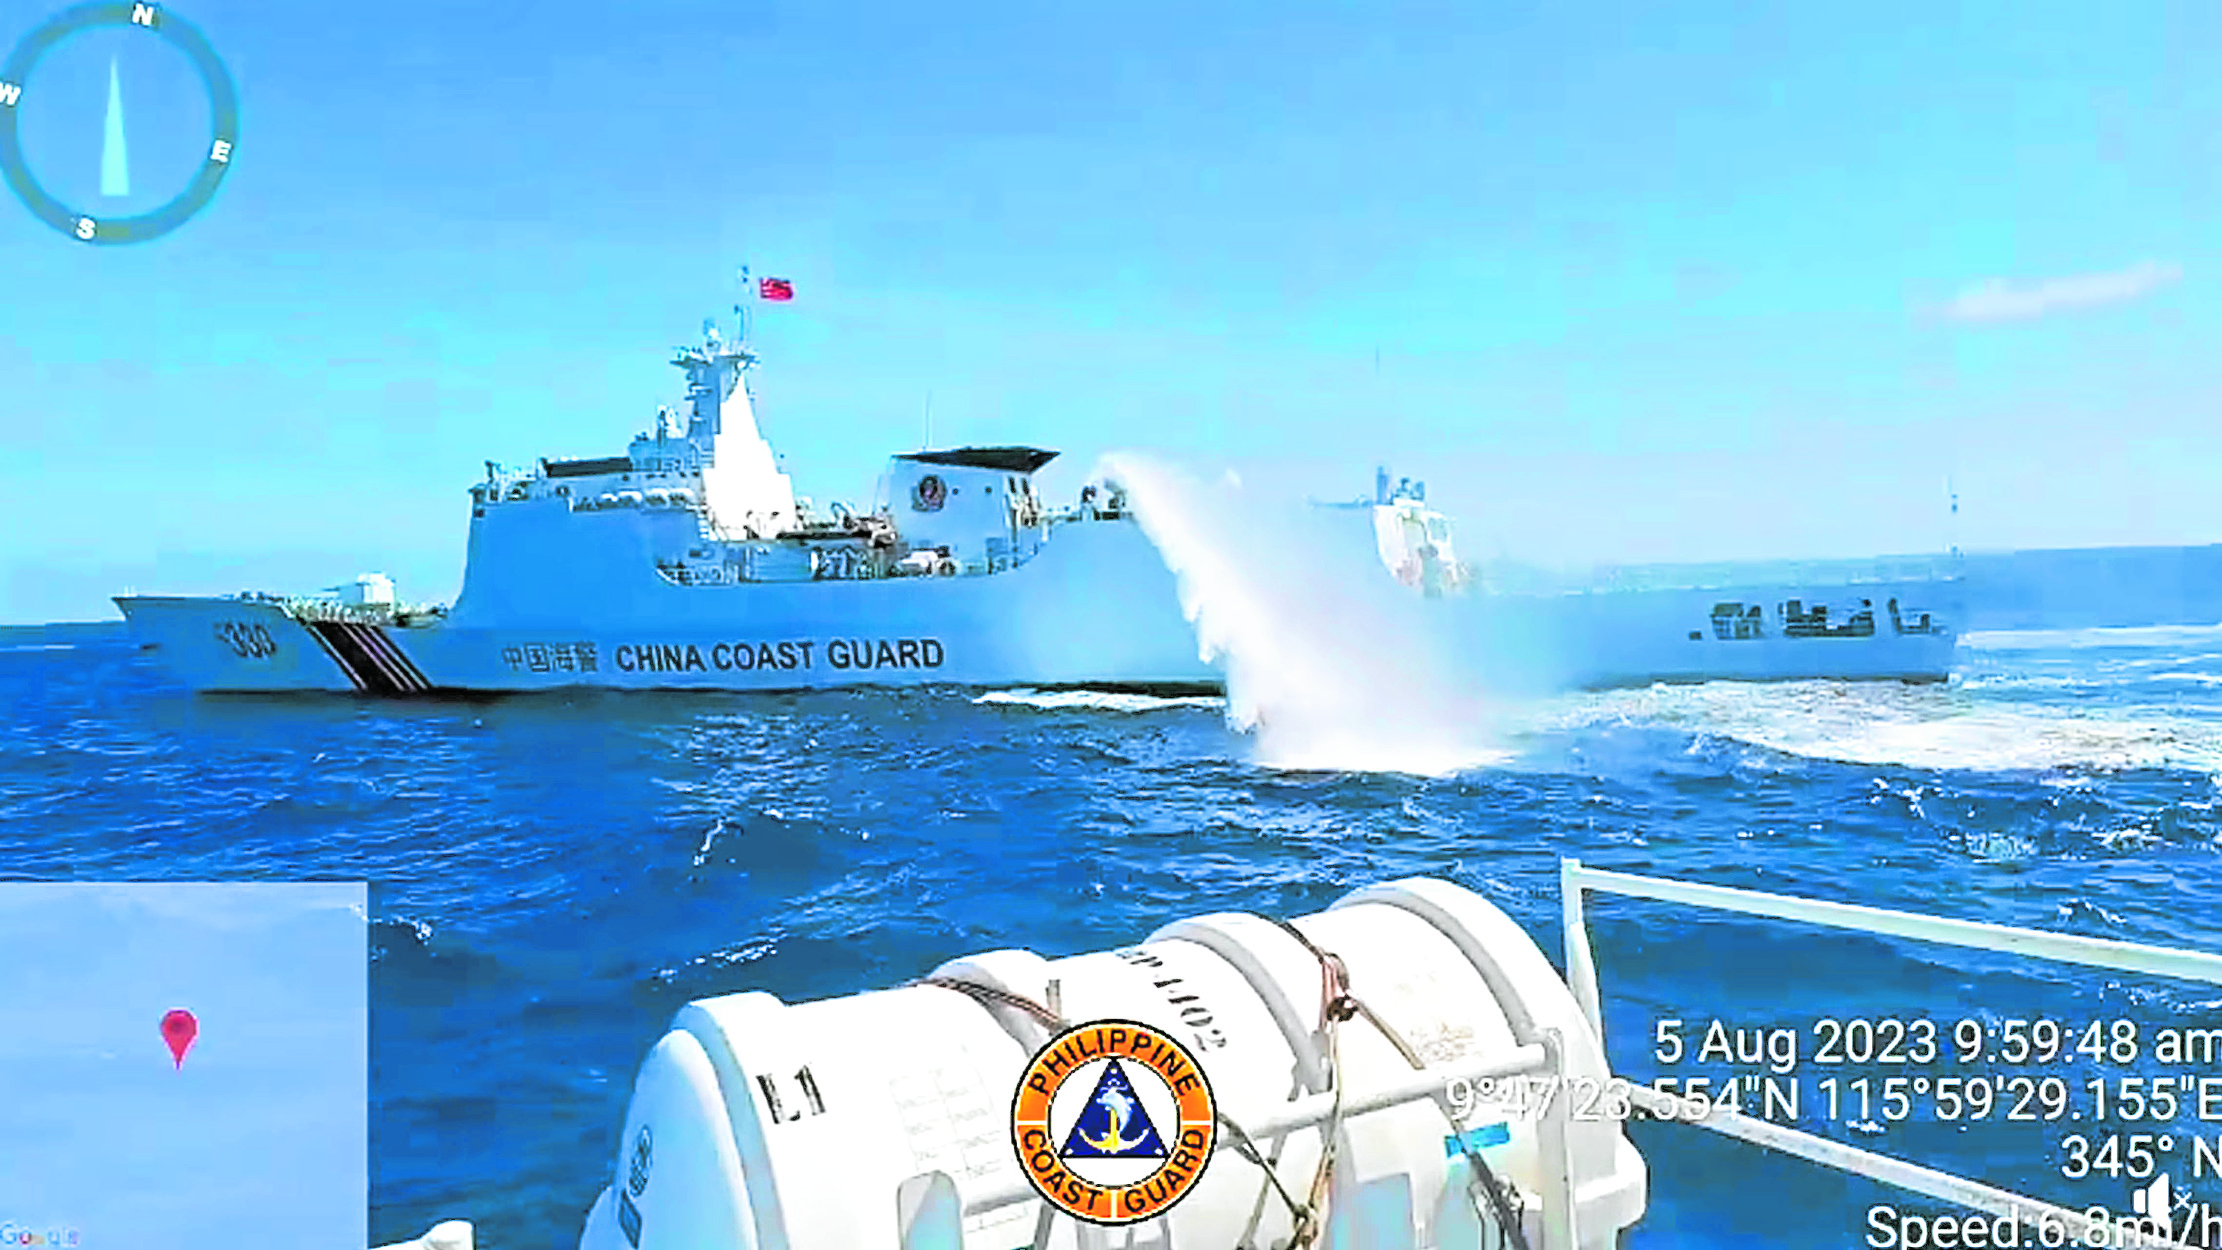 PCG chief says China Coast Guard’s actions cast doubt on its ‘real identity’